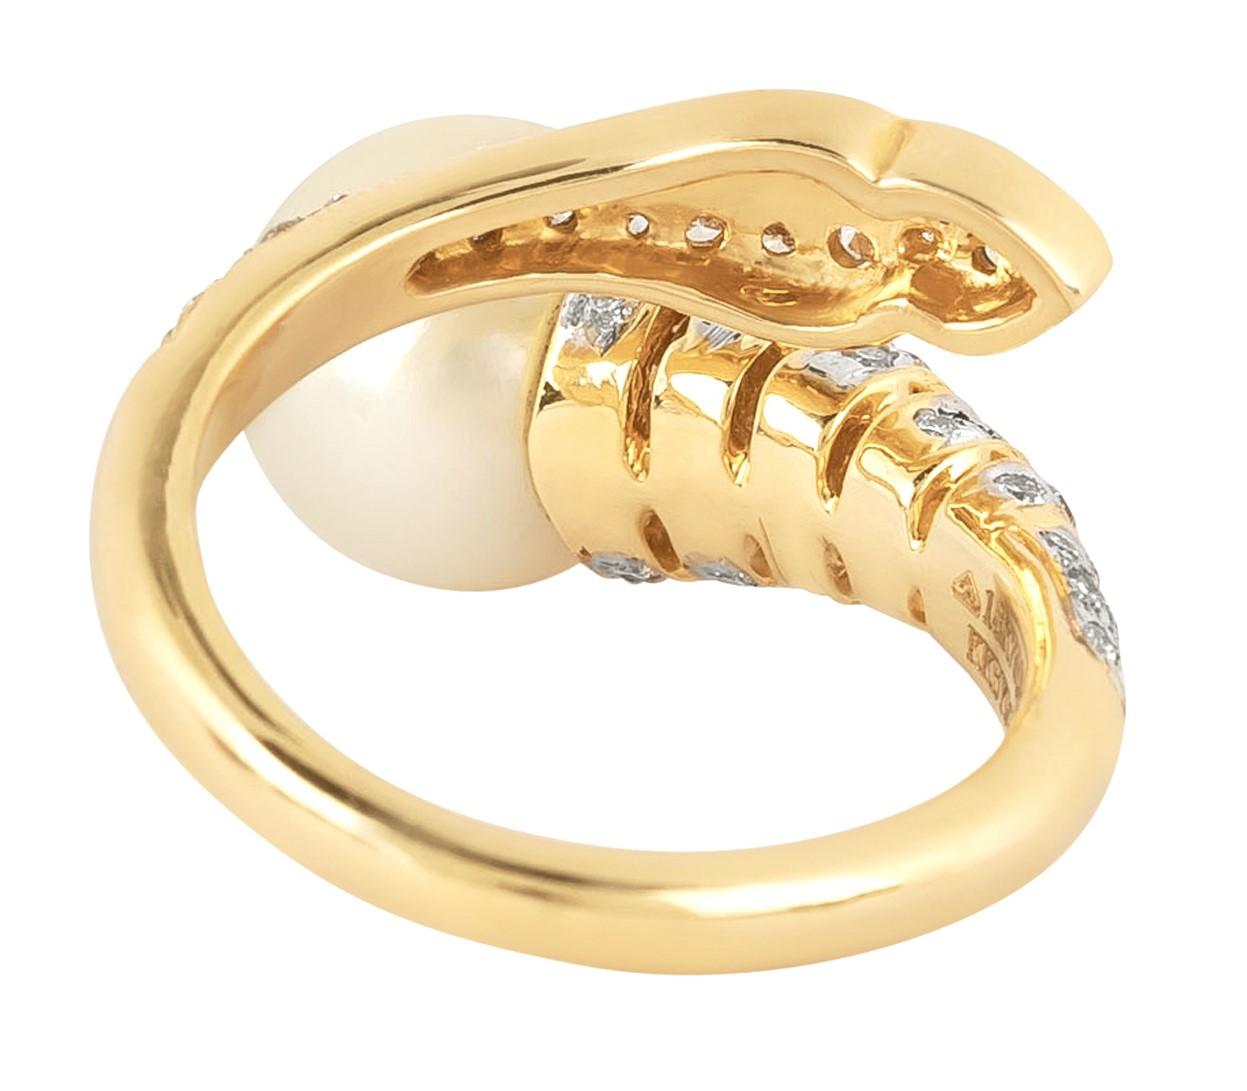 Contemporary 18 Karat Gold 6.25 Carat Diamond and Pearl Statement Ring  For Sale